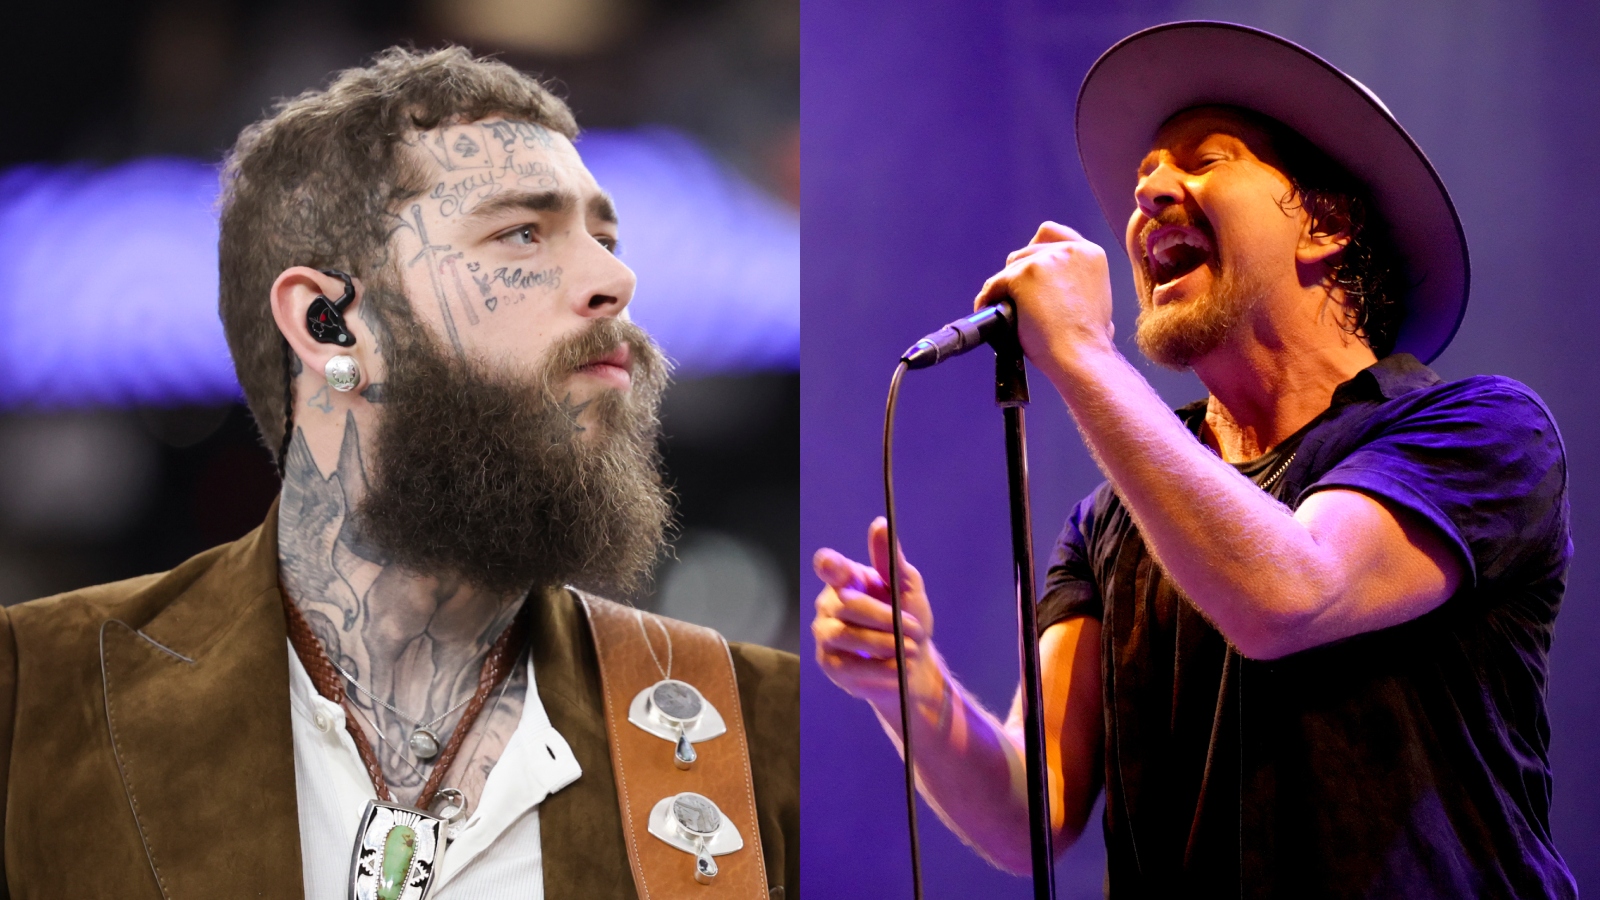 Post Malone And Eddie Vedder Jamming To Tom Petty And Pearl Jam Songs Is The Good Stuff #PostMalone